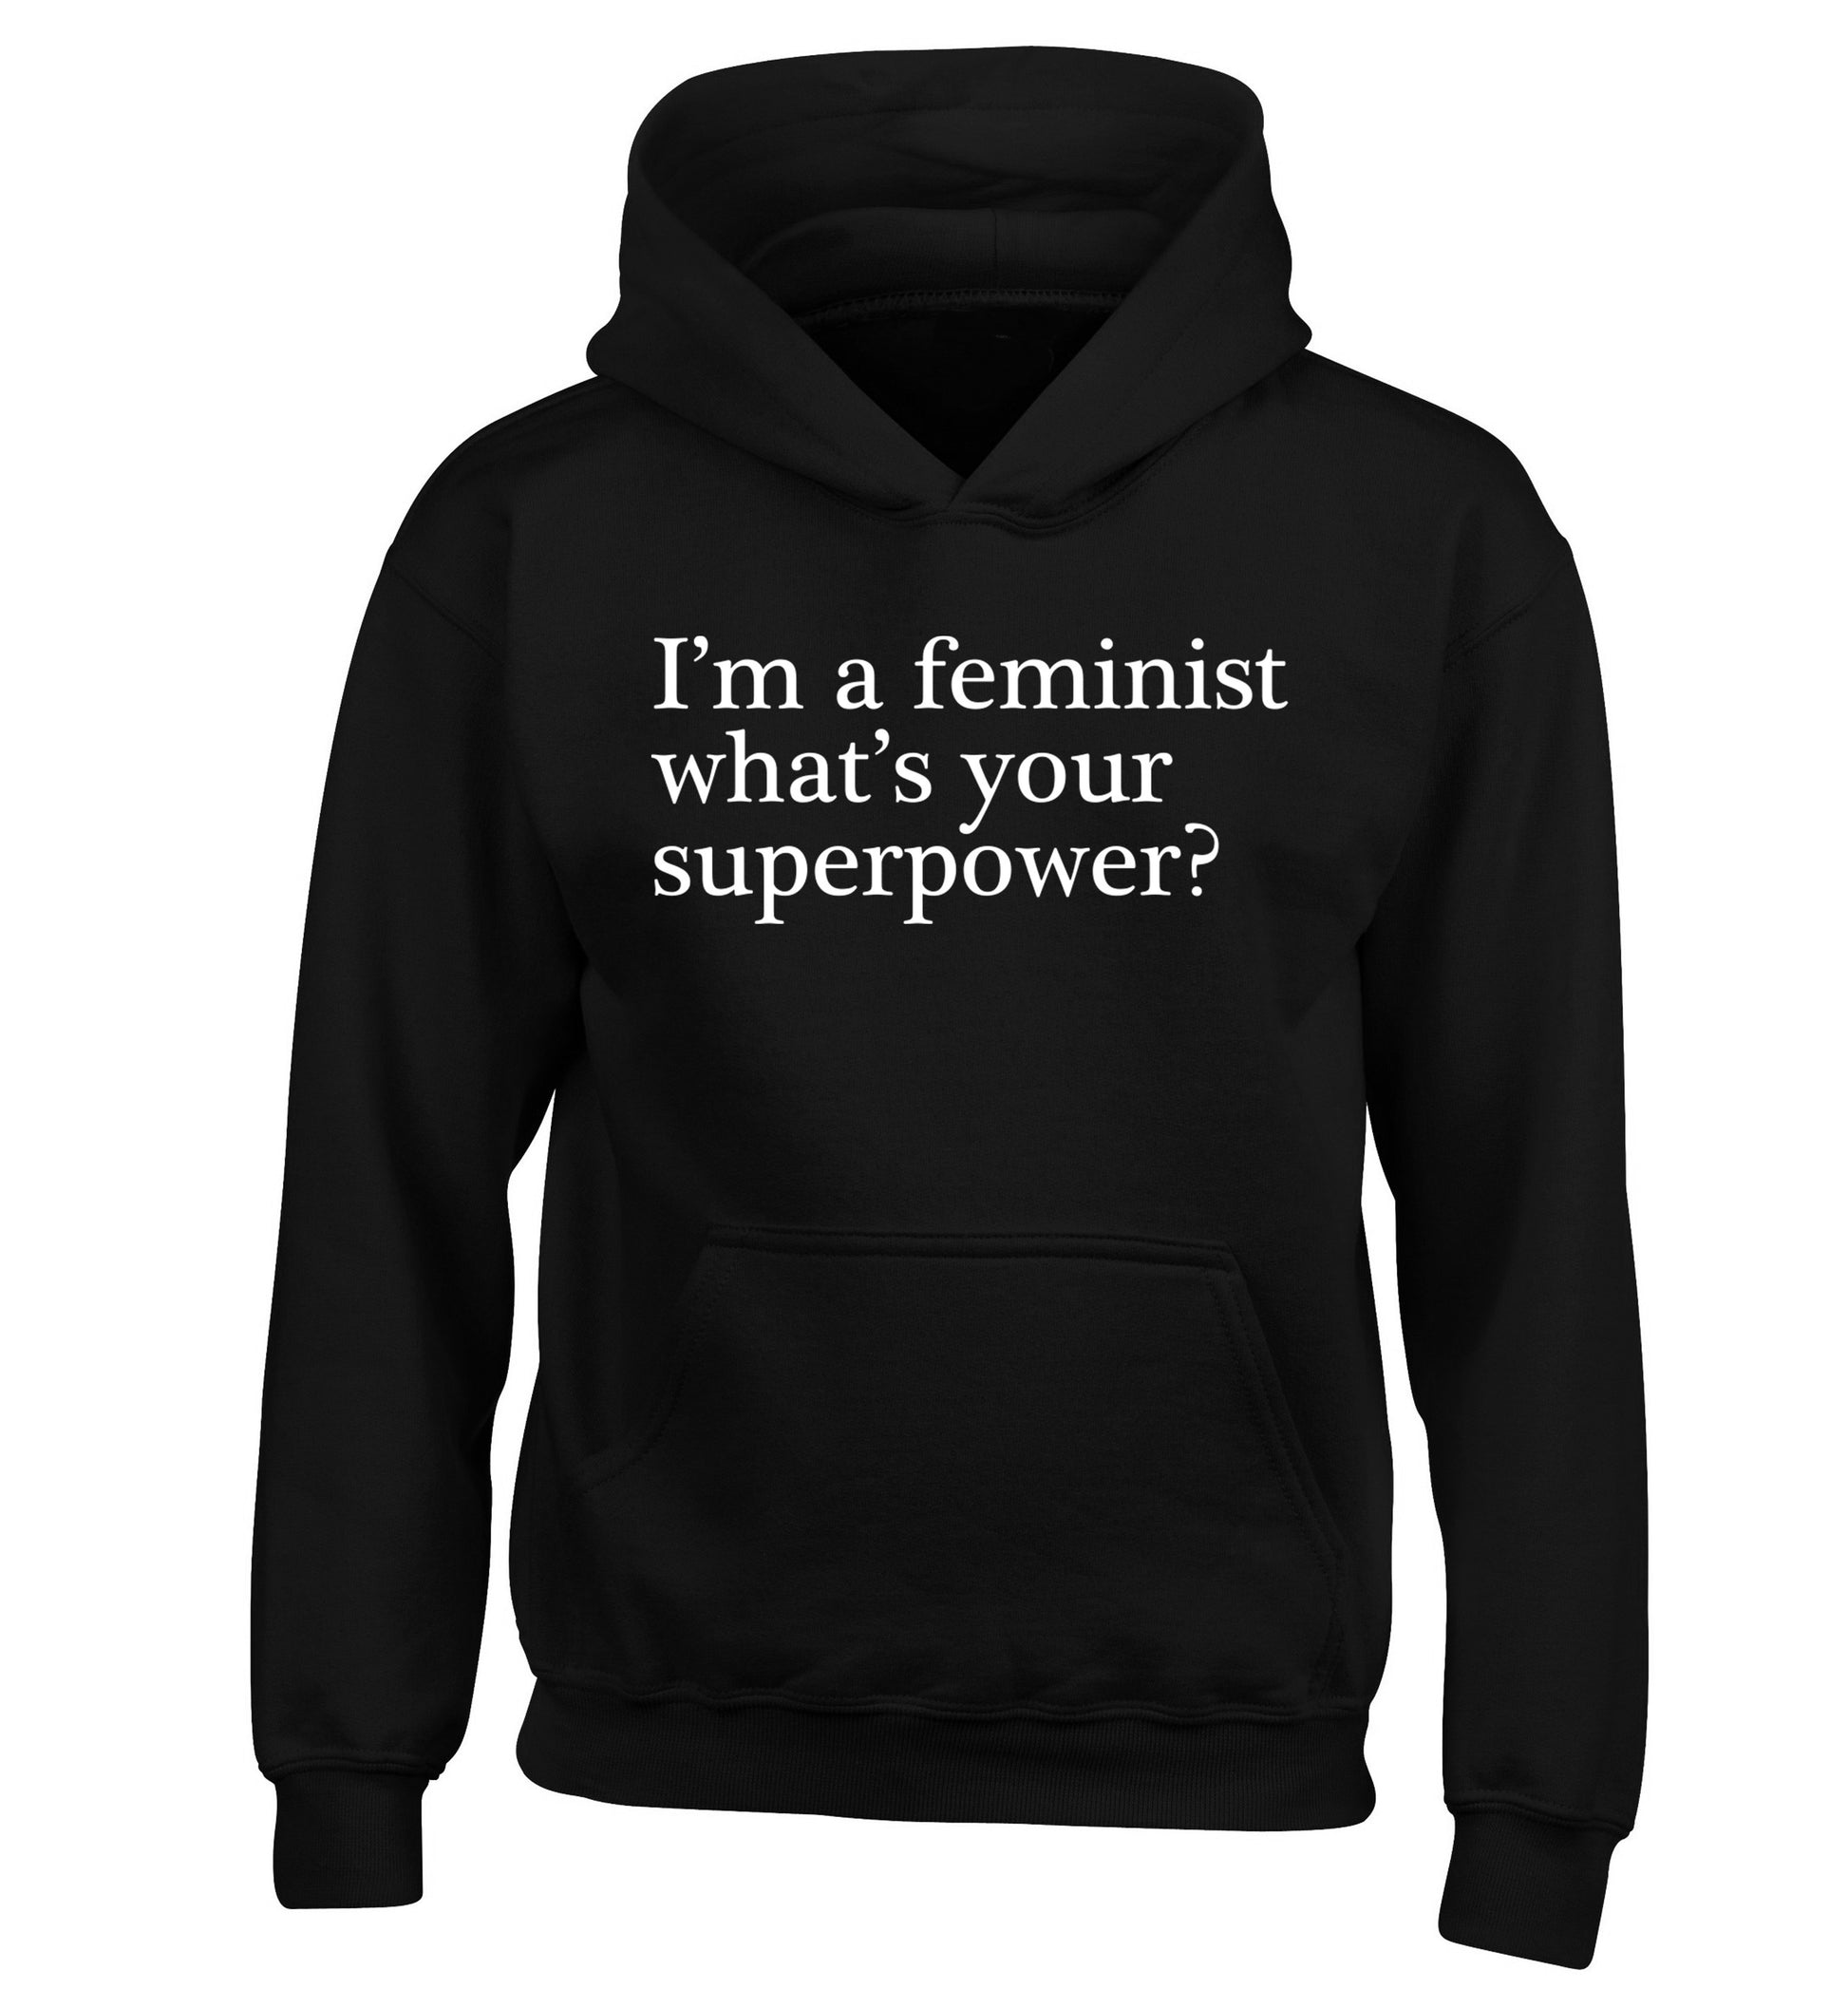 I'm a feminist what's your superpower? children's black hoodie 12-14 Years